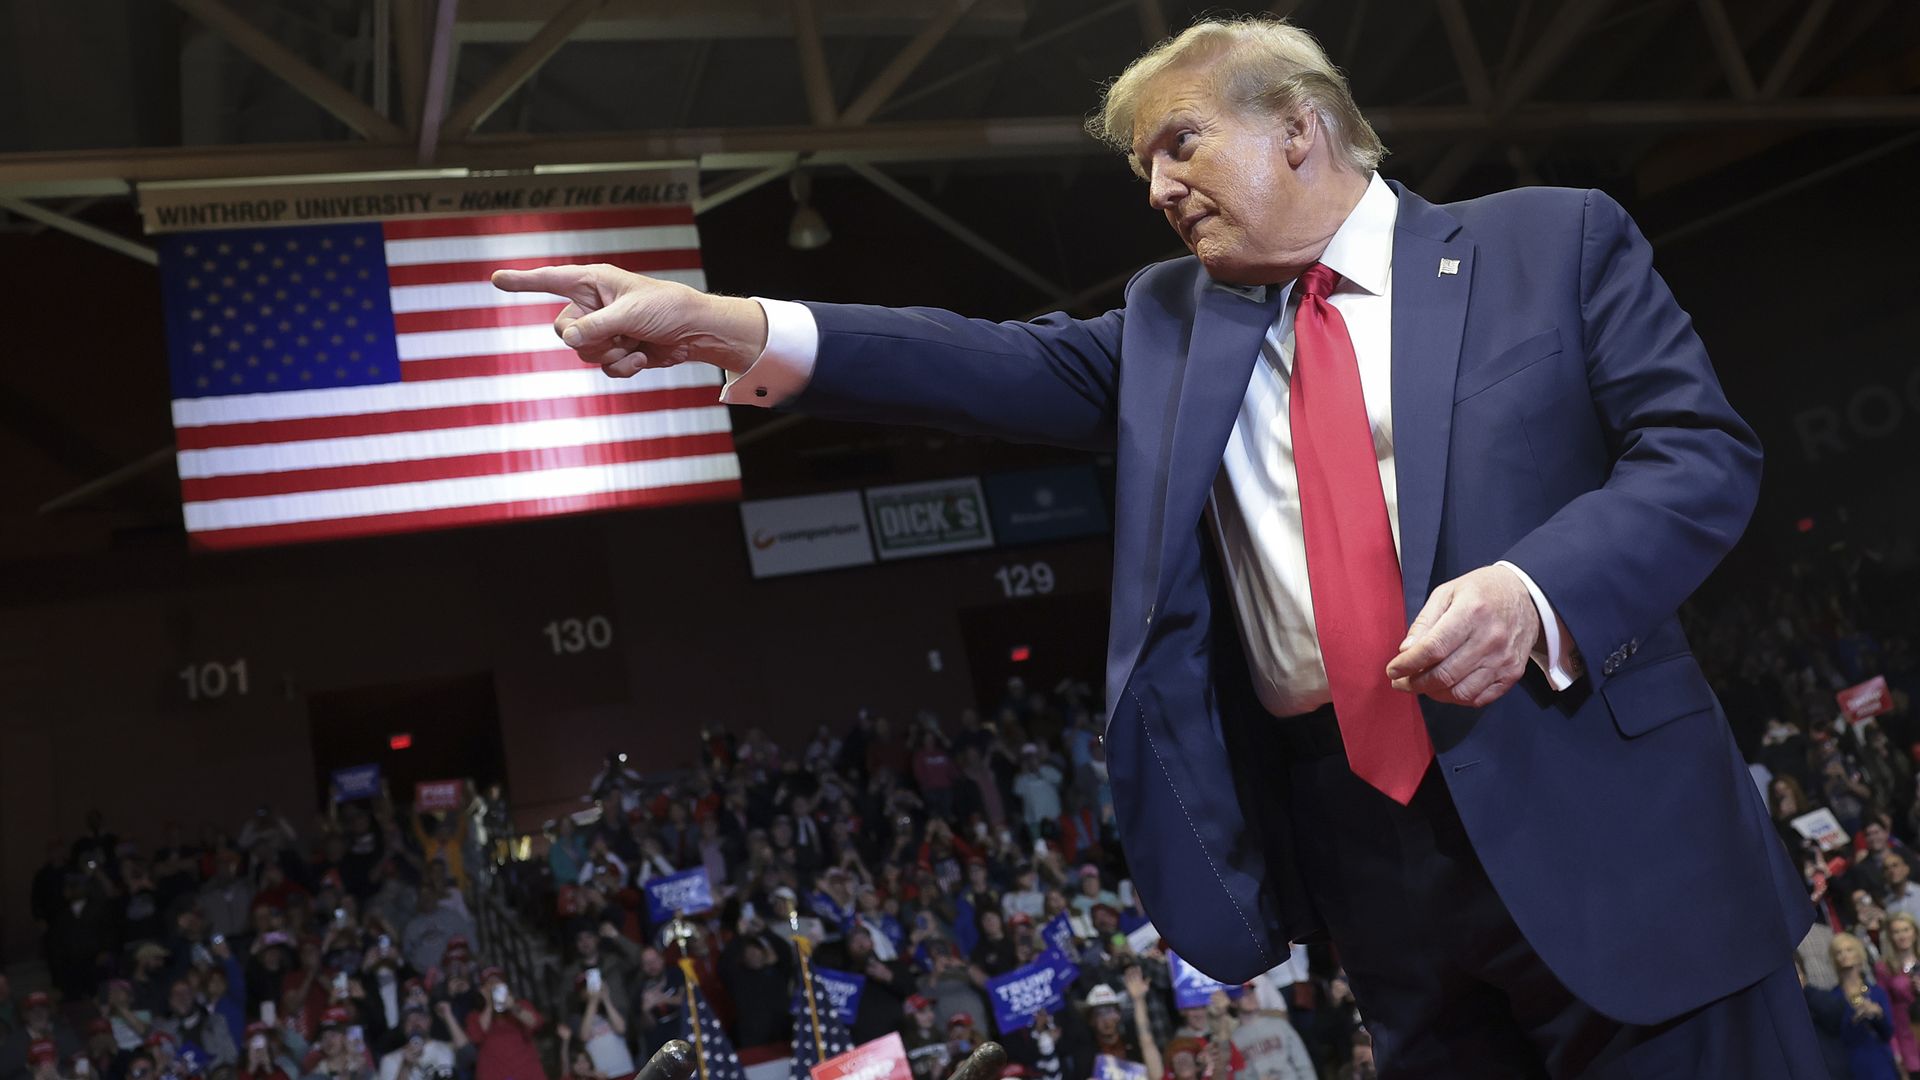 President Donald Trump gestures to supporters after speaking at a Get Out The Vote rally at Winthrop University on February 23, 2024 in Rock Hill, South Carolina